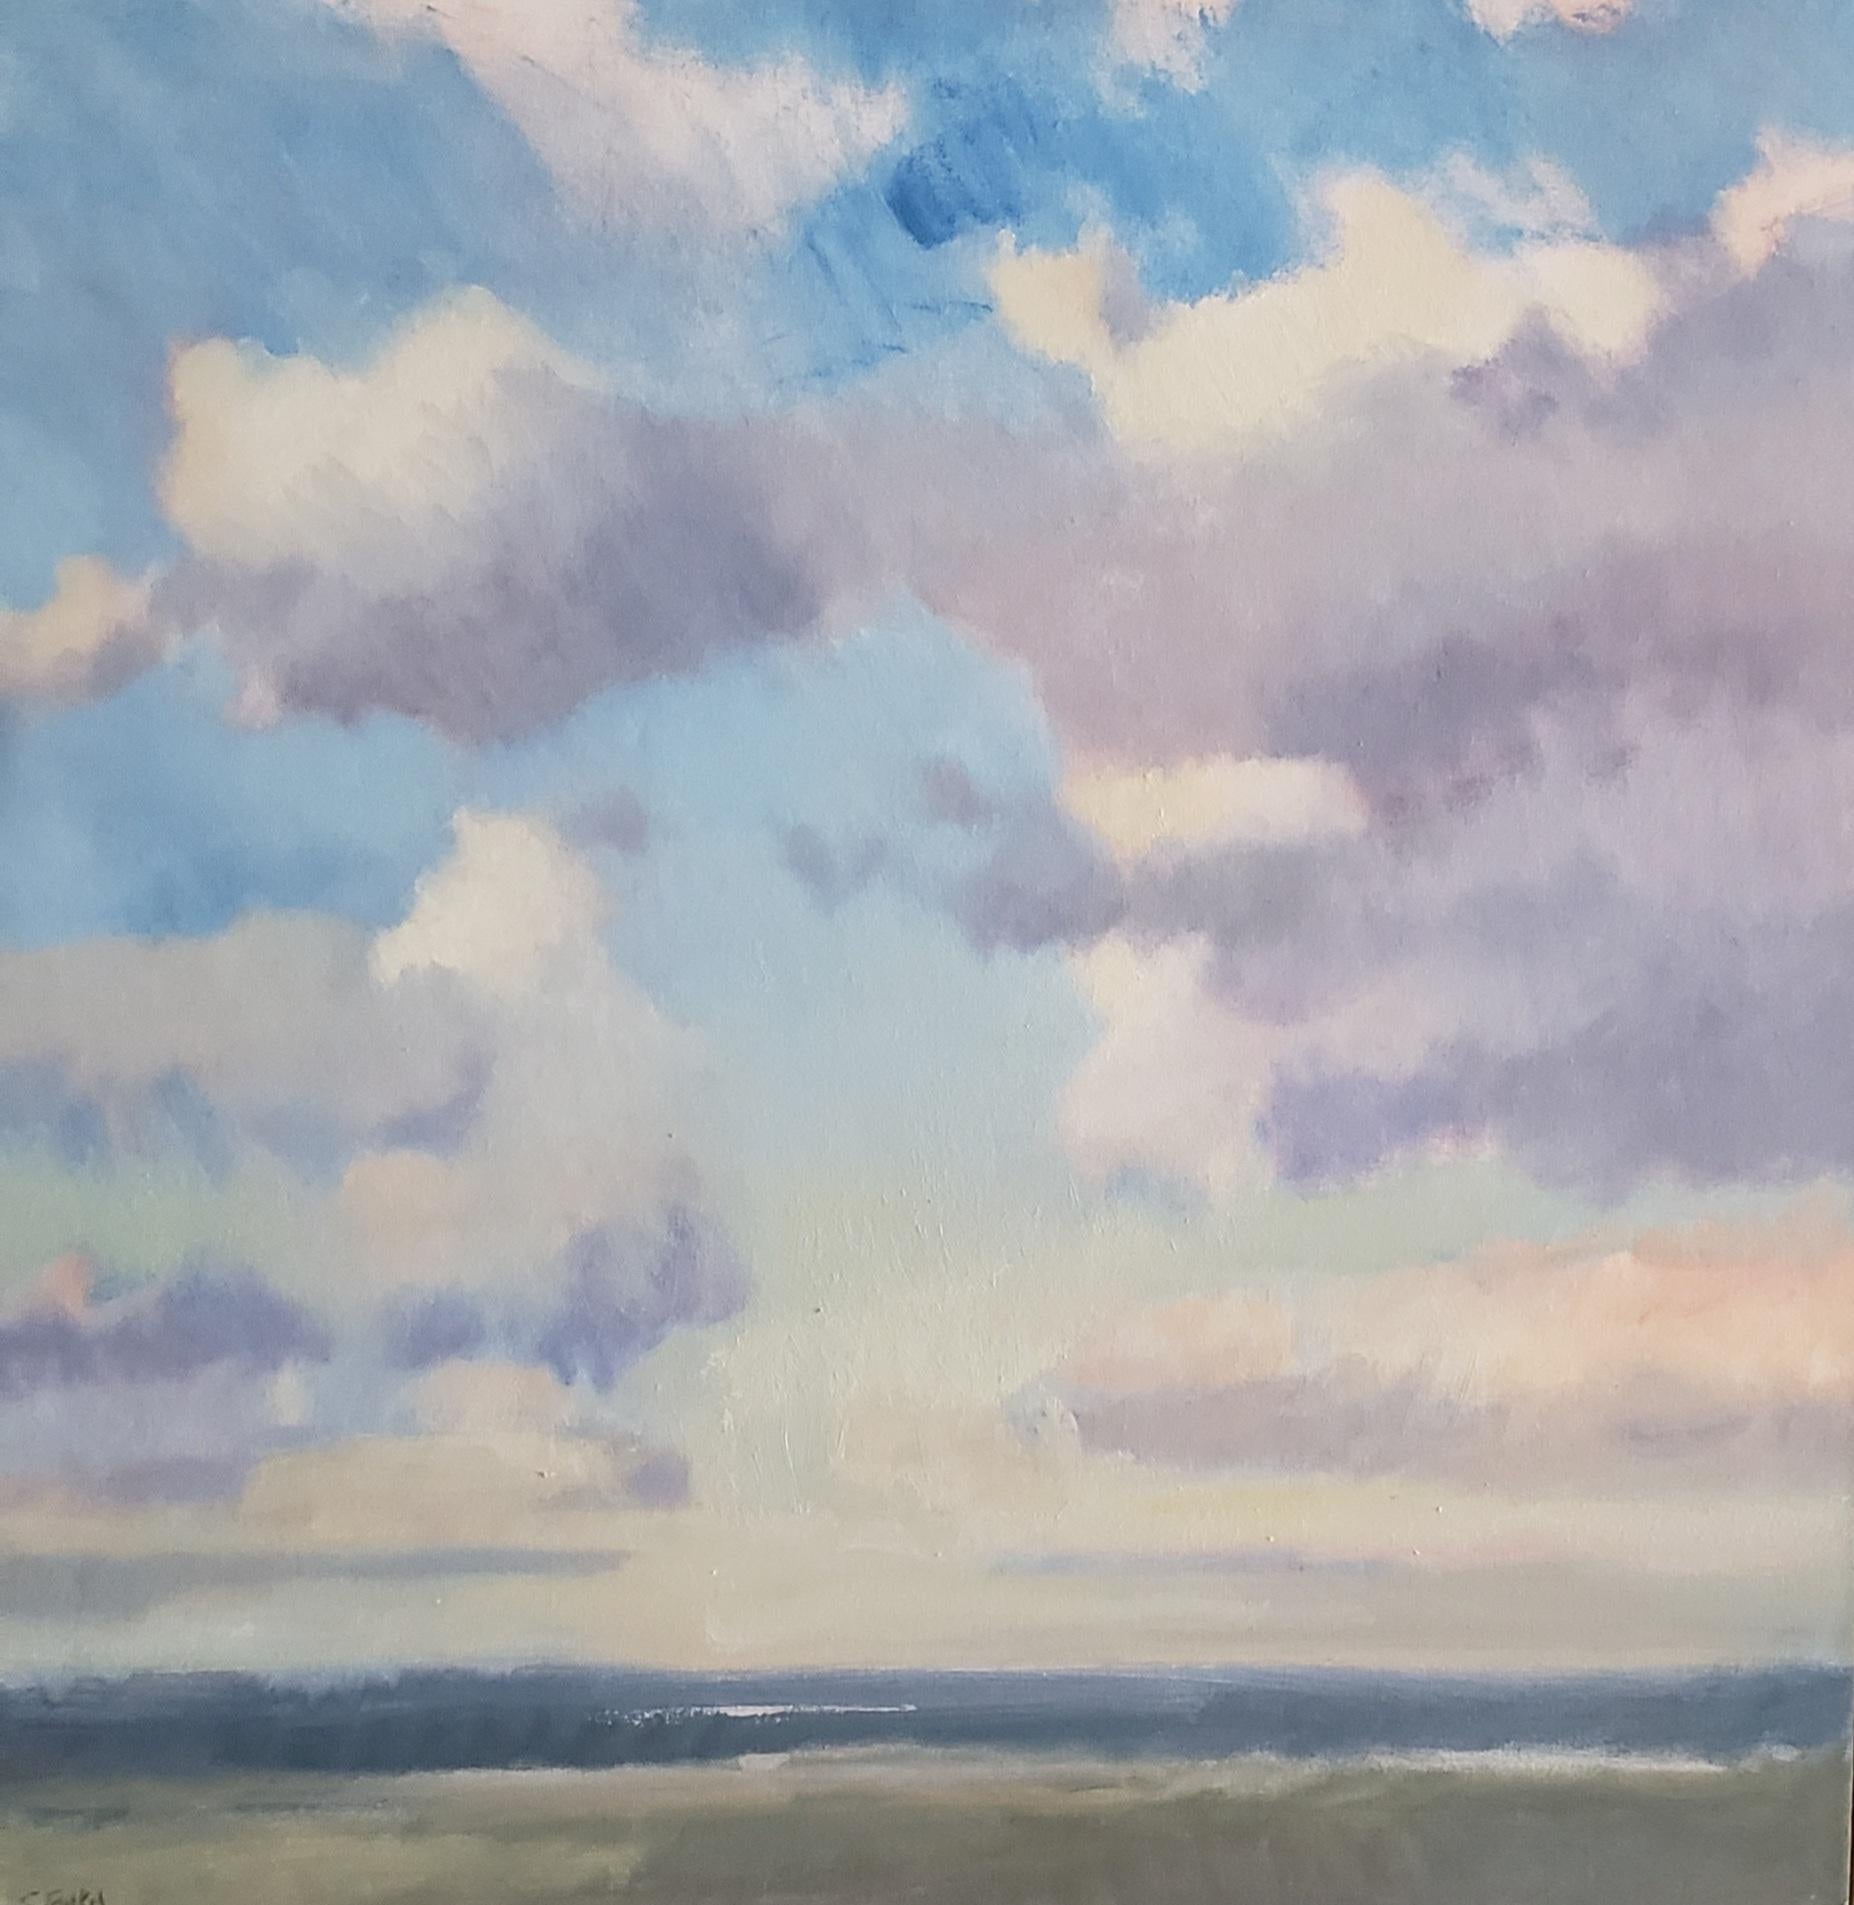  Sky ,Texas landscape oil painting, Contemporary Impressionistic style